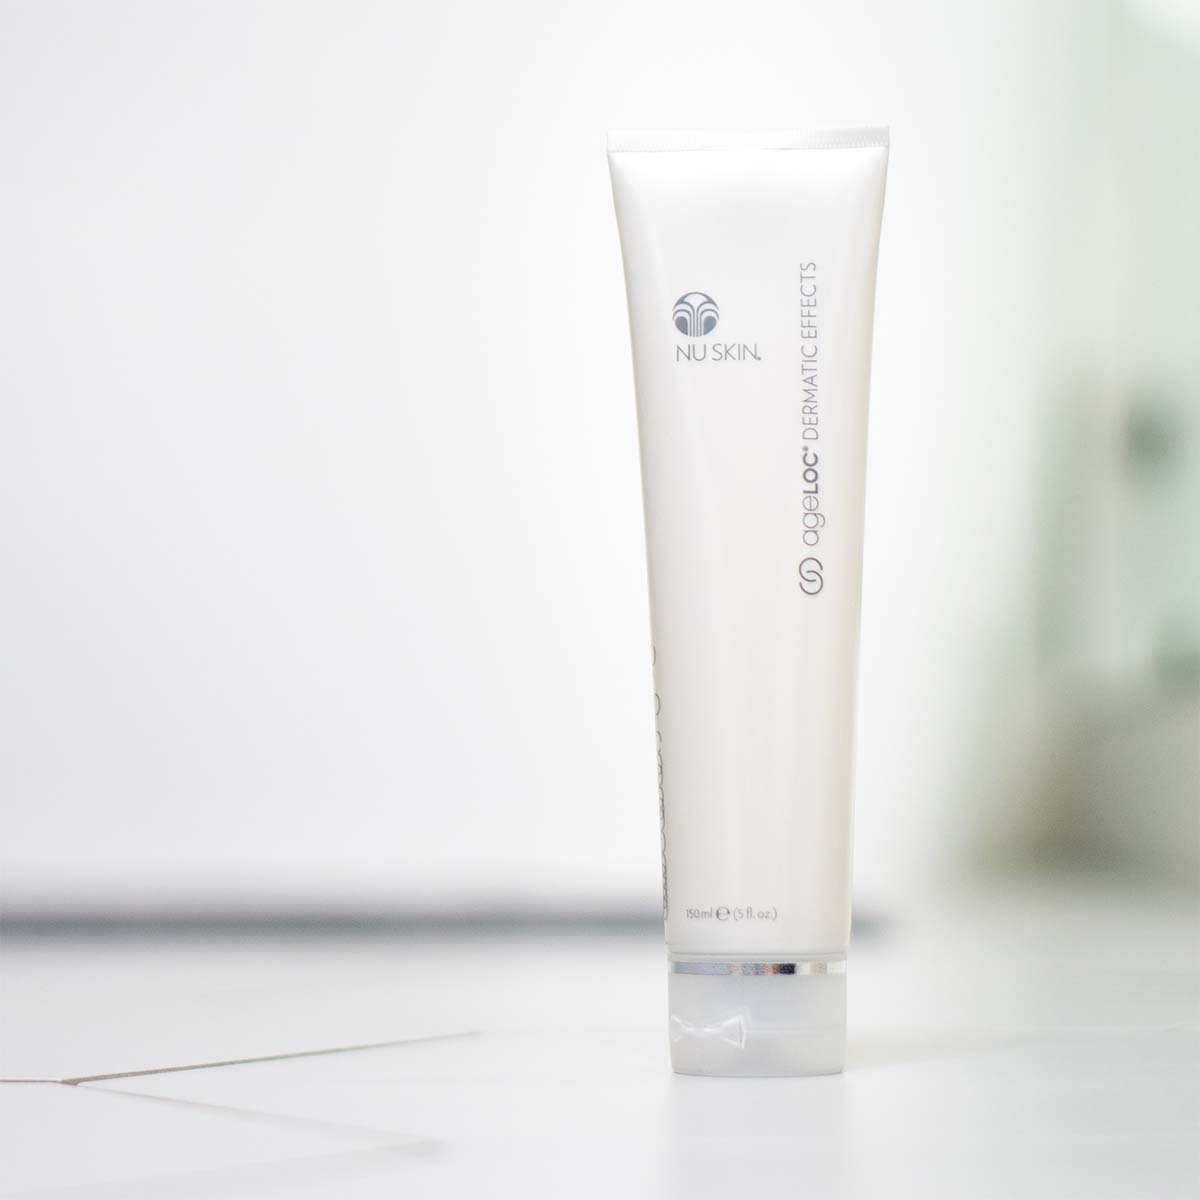 forvisning middag erosion ageLOC® Dermatic Effects Body Contouring Lotion | Nu Skin